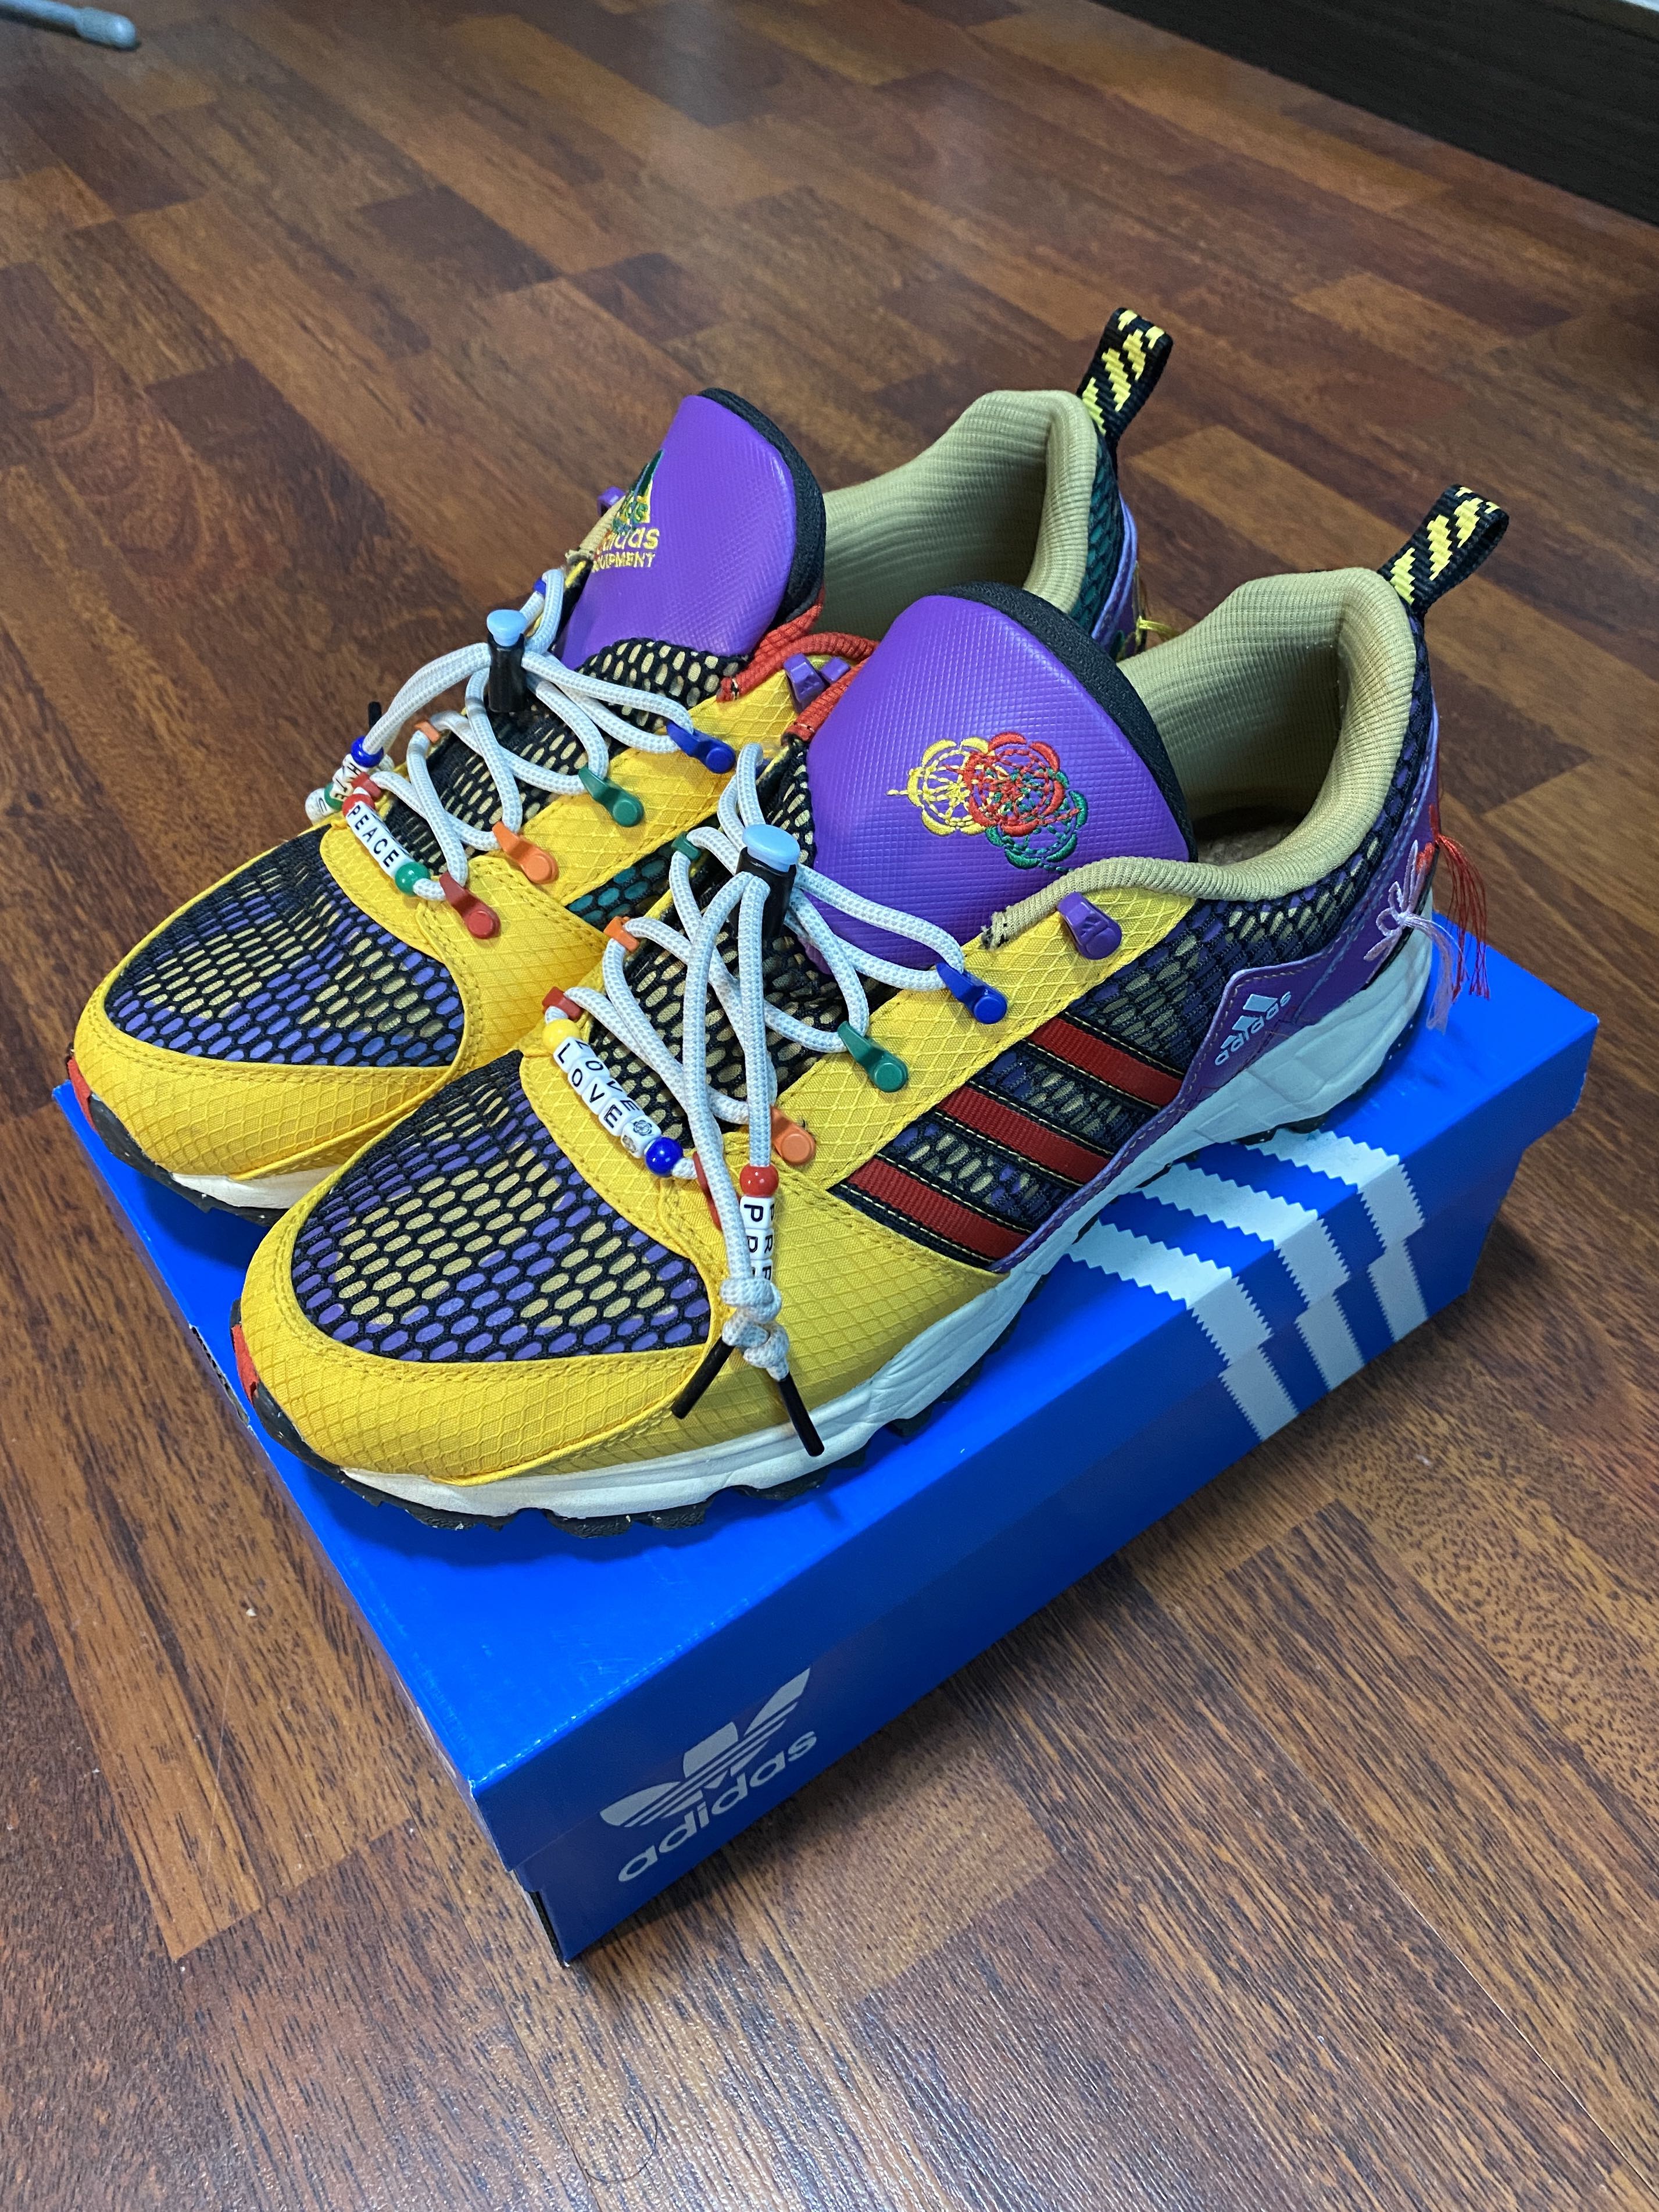 Adidas x Sean Wotherspoon EQT Support 93, Men's Fashion, Footwear ...